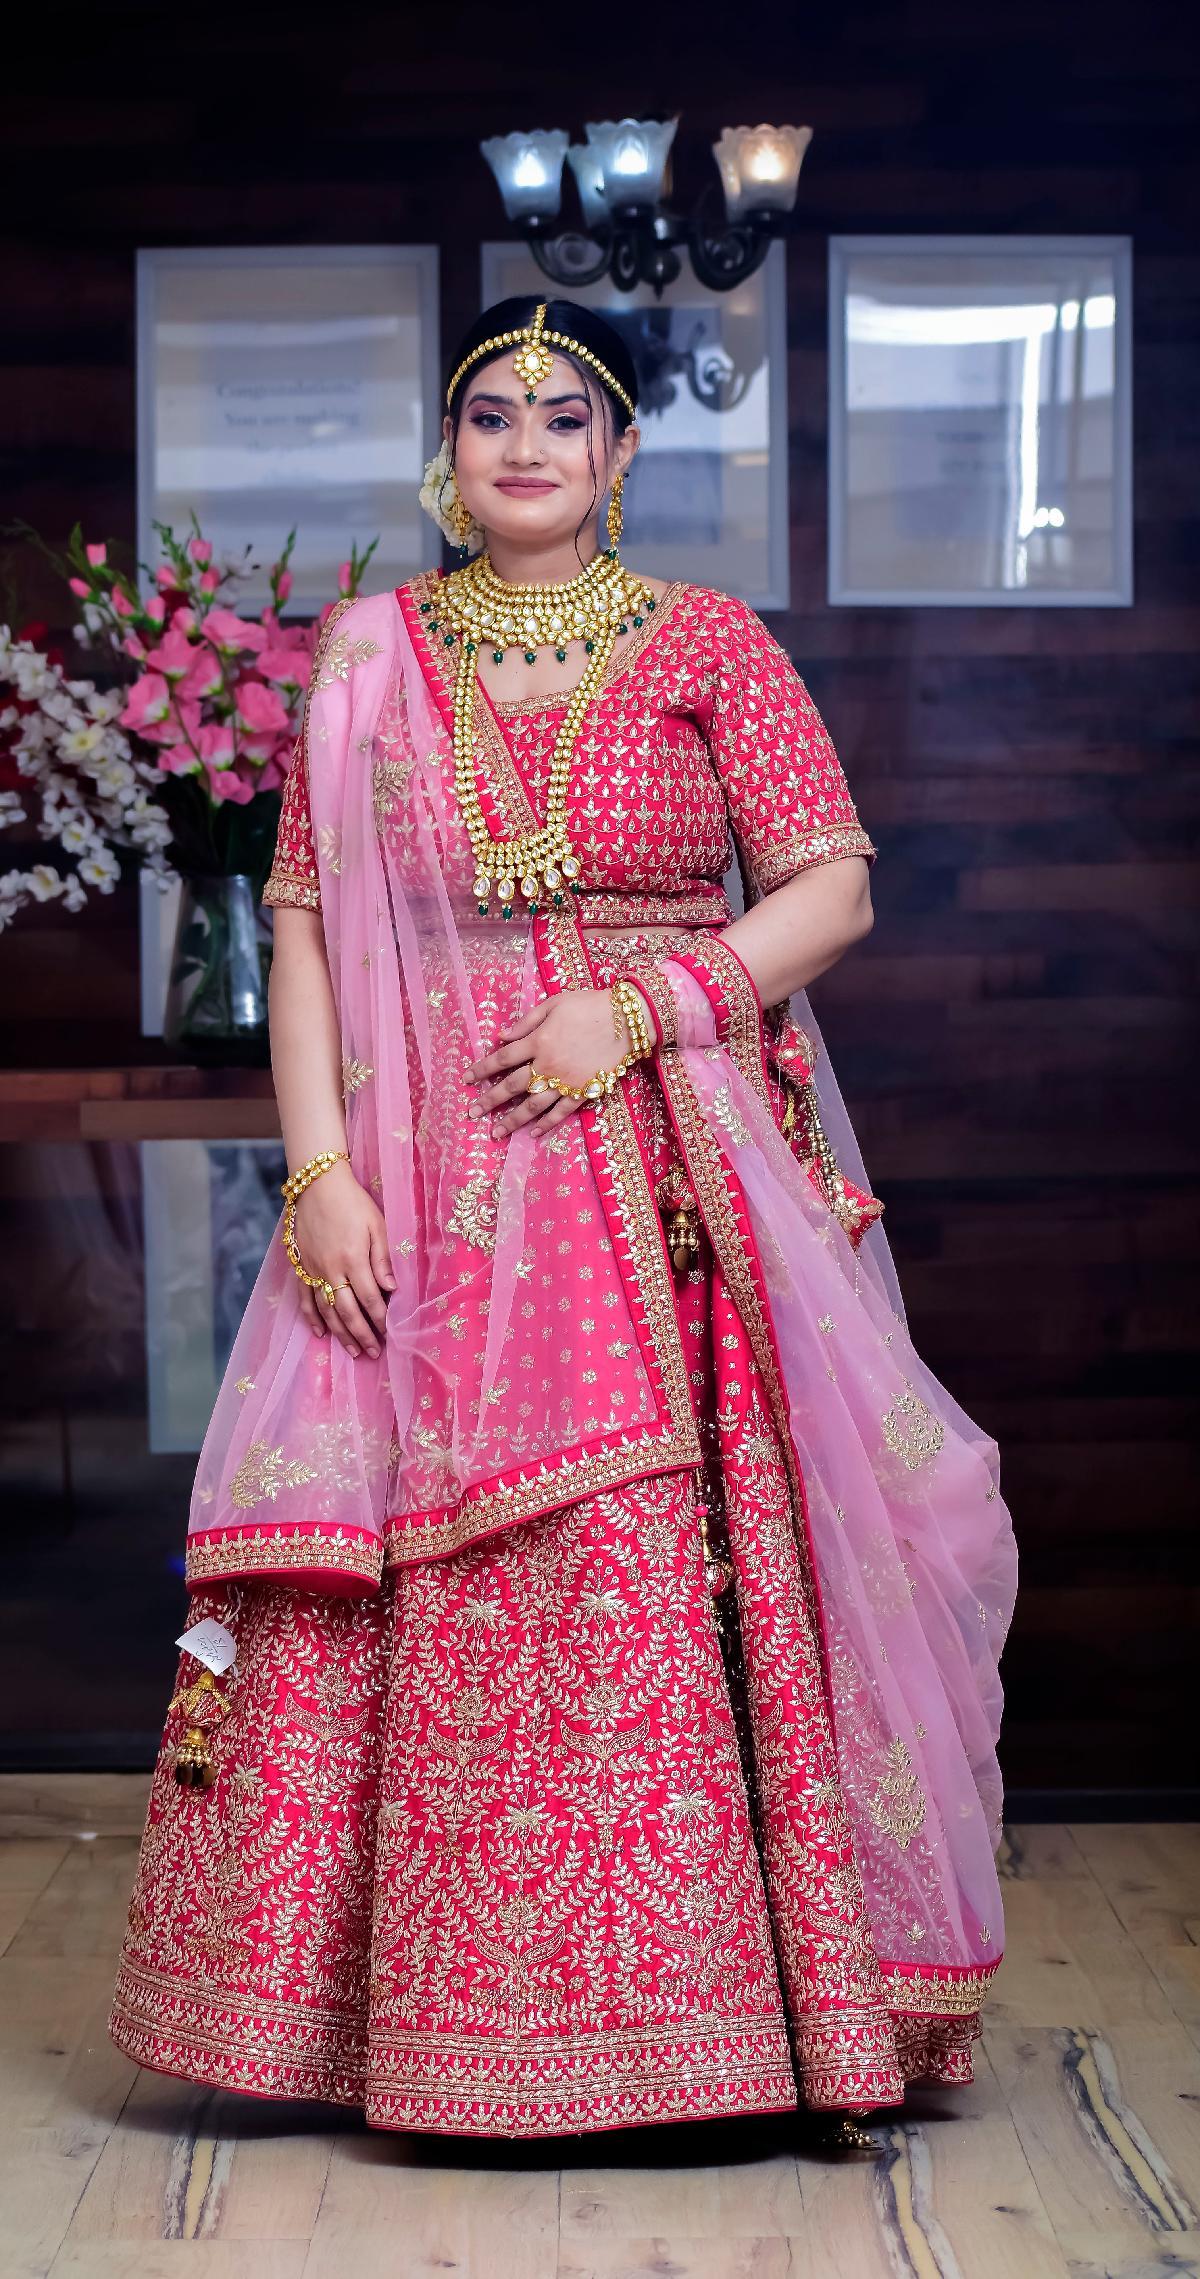 30+ Different Shades Of Pink We Spotted In Bridal Lehengas! | Pink bridal  lehenga, Bridal lehenga images, Dusty pink outfits